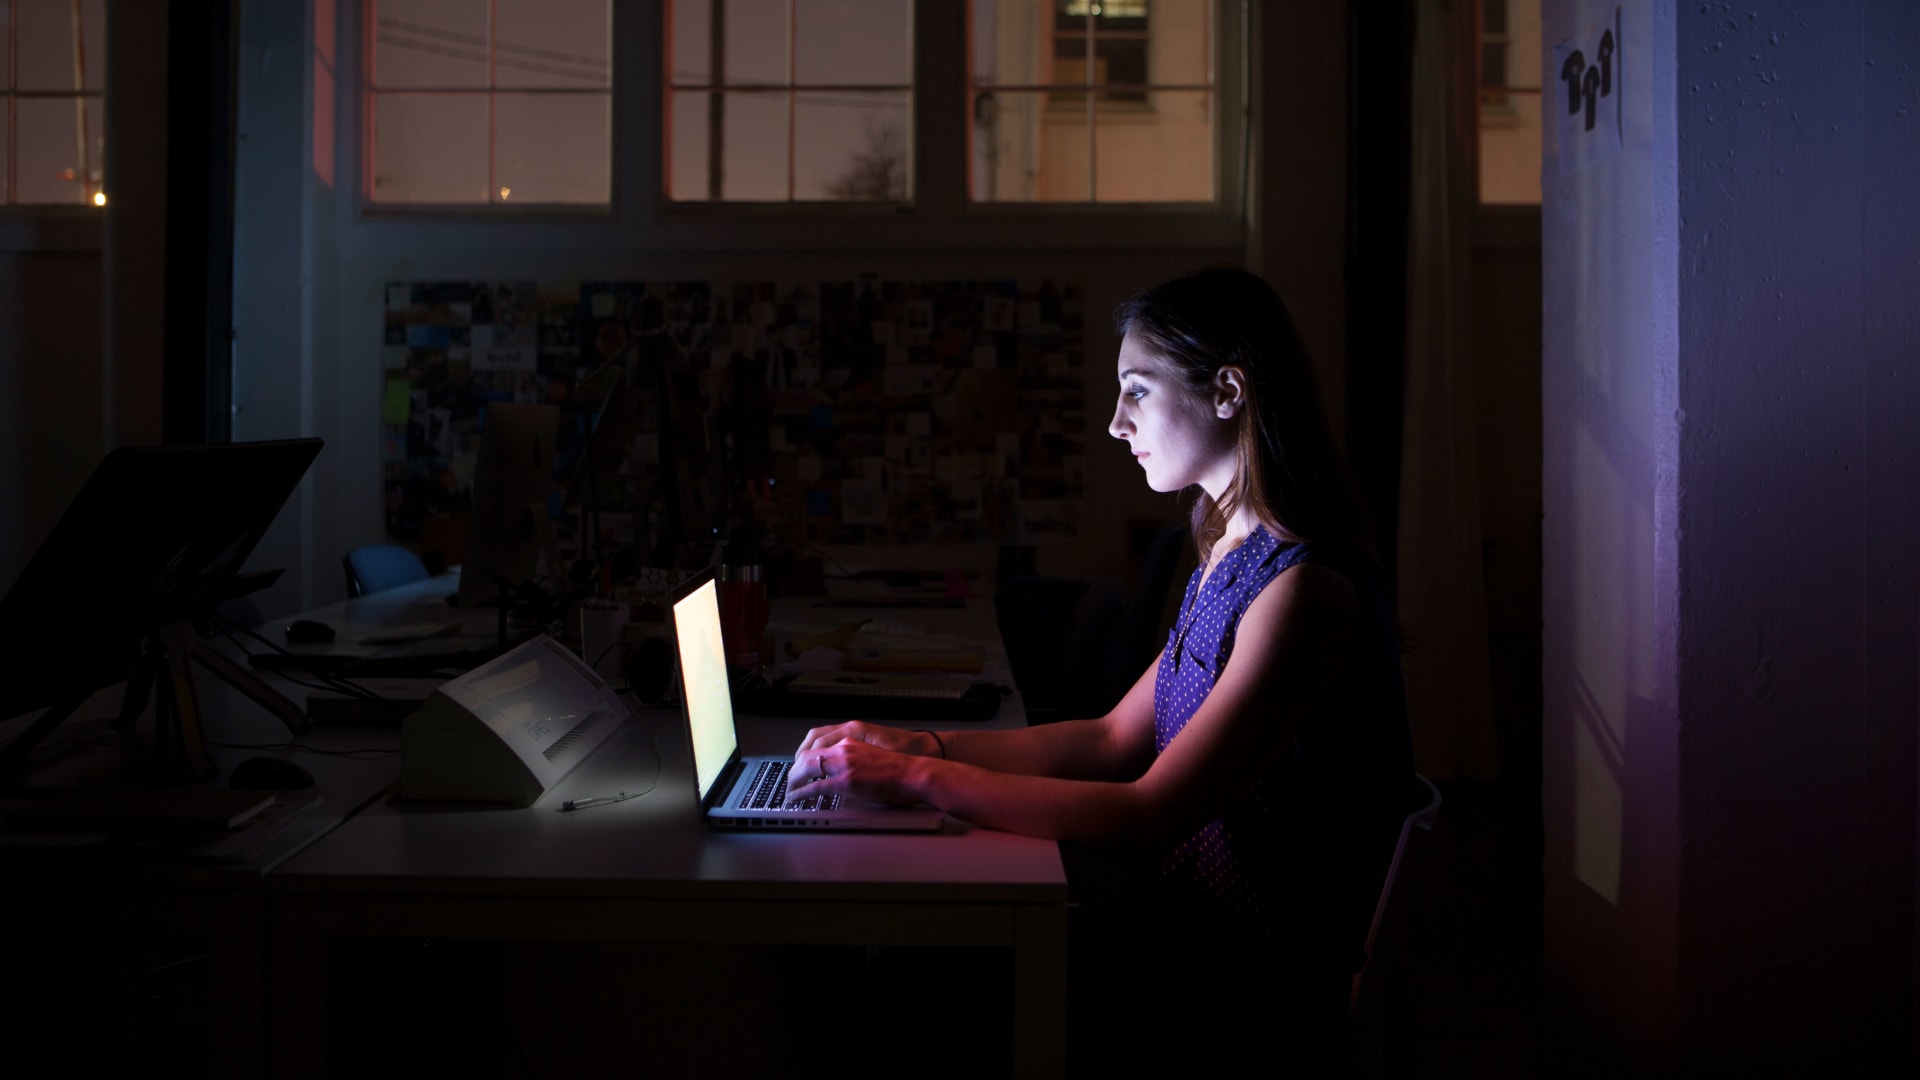 Working Late Into the Night? It Could Be Harming Your Mental Health